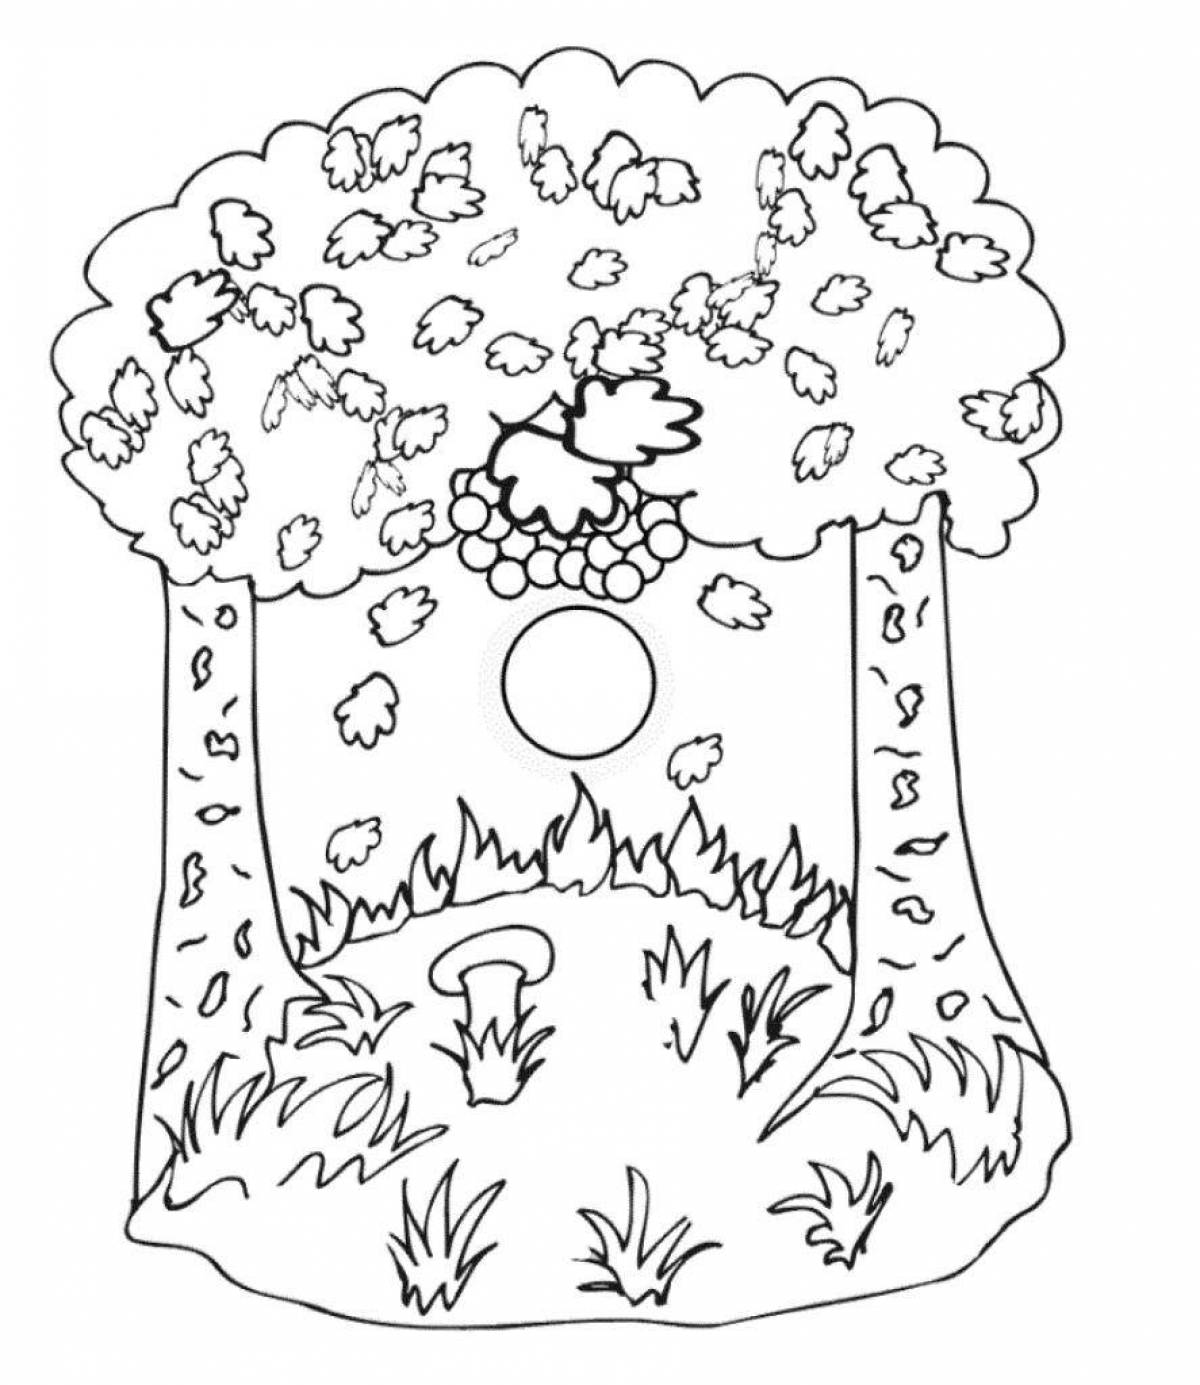 Calm cleaning coloring page